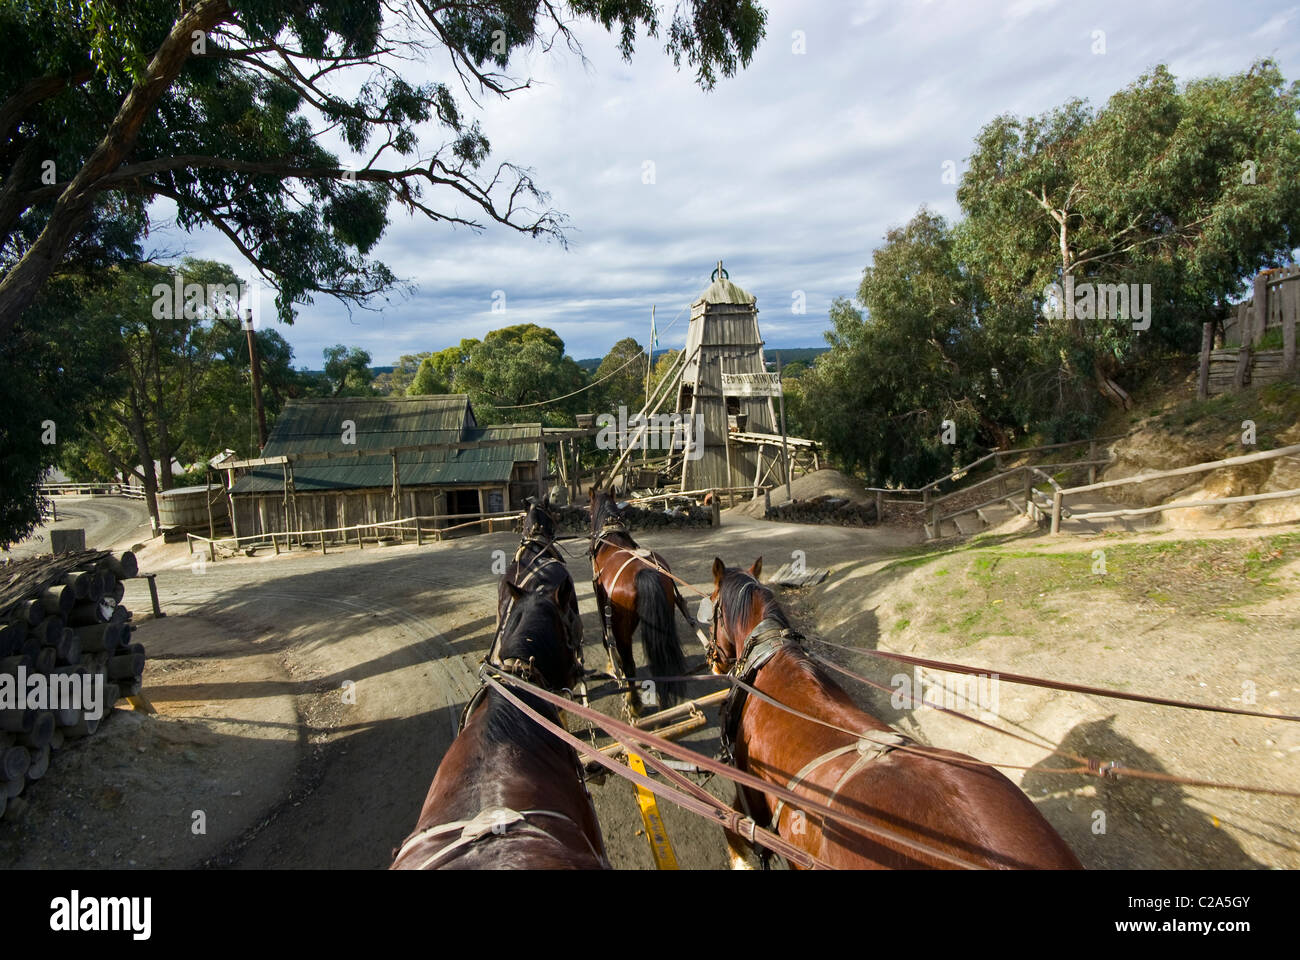 A team of Clydesdale horses pull a stagecoach in a gold mining town. Stock Photo